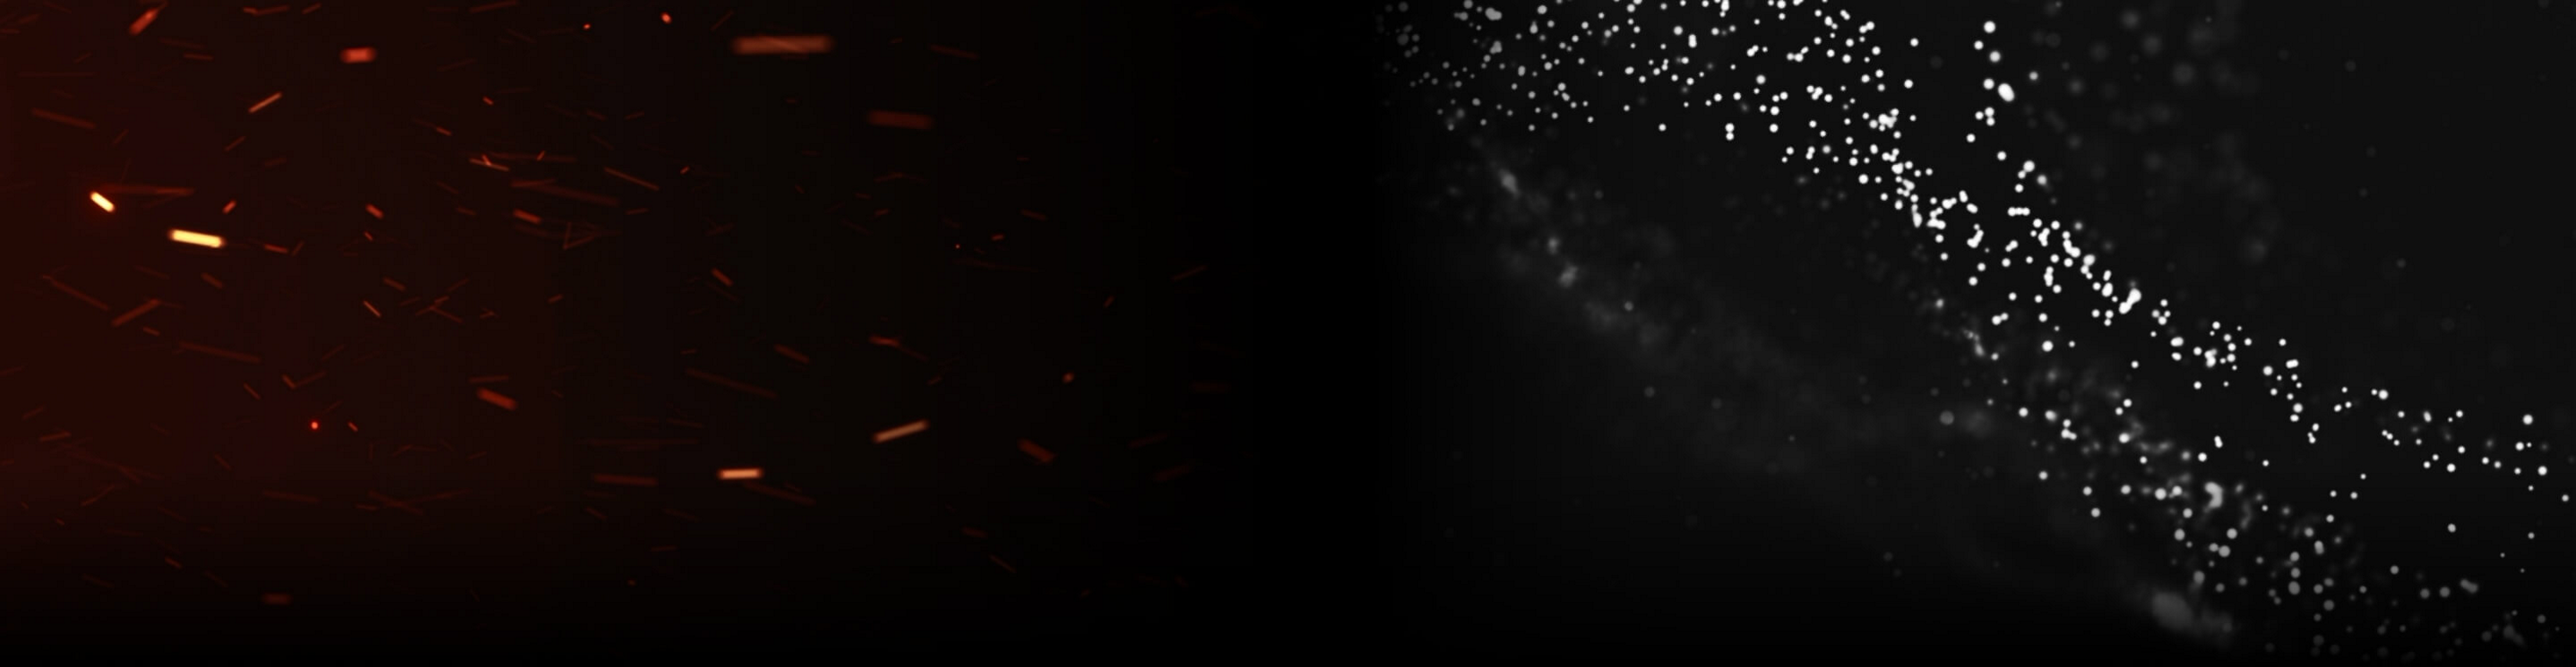 Sparks and white particles on a dark background.